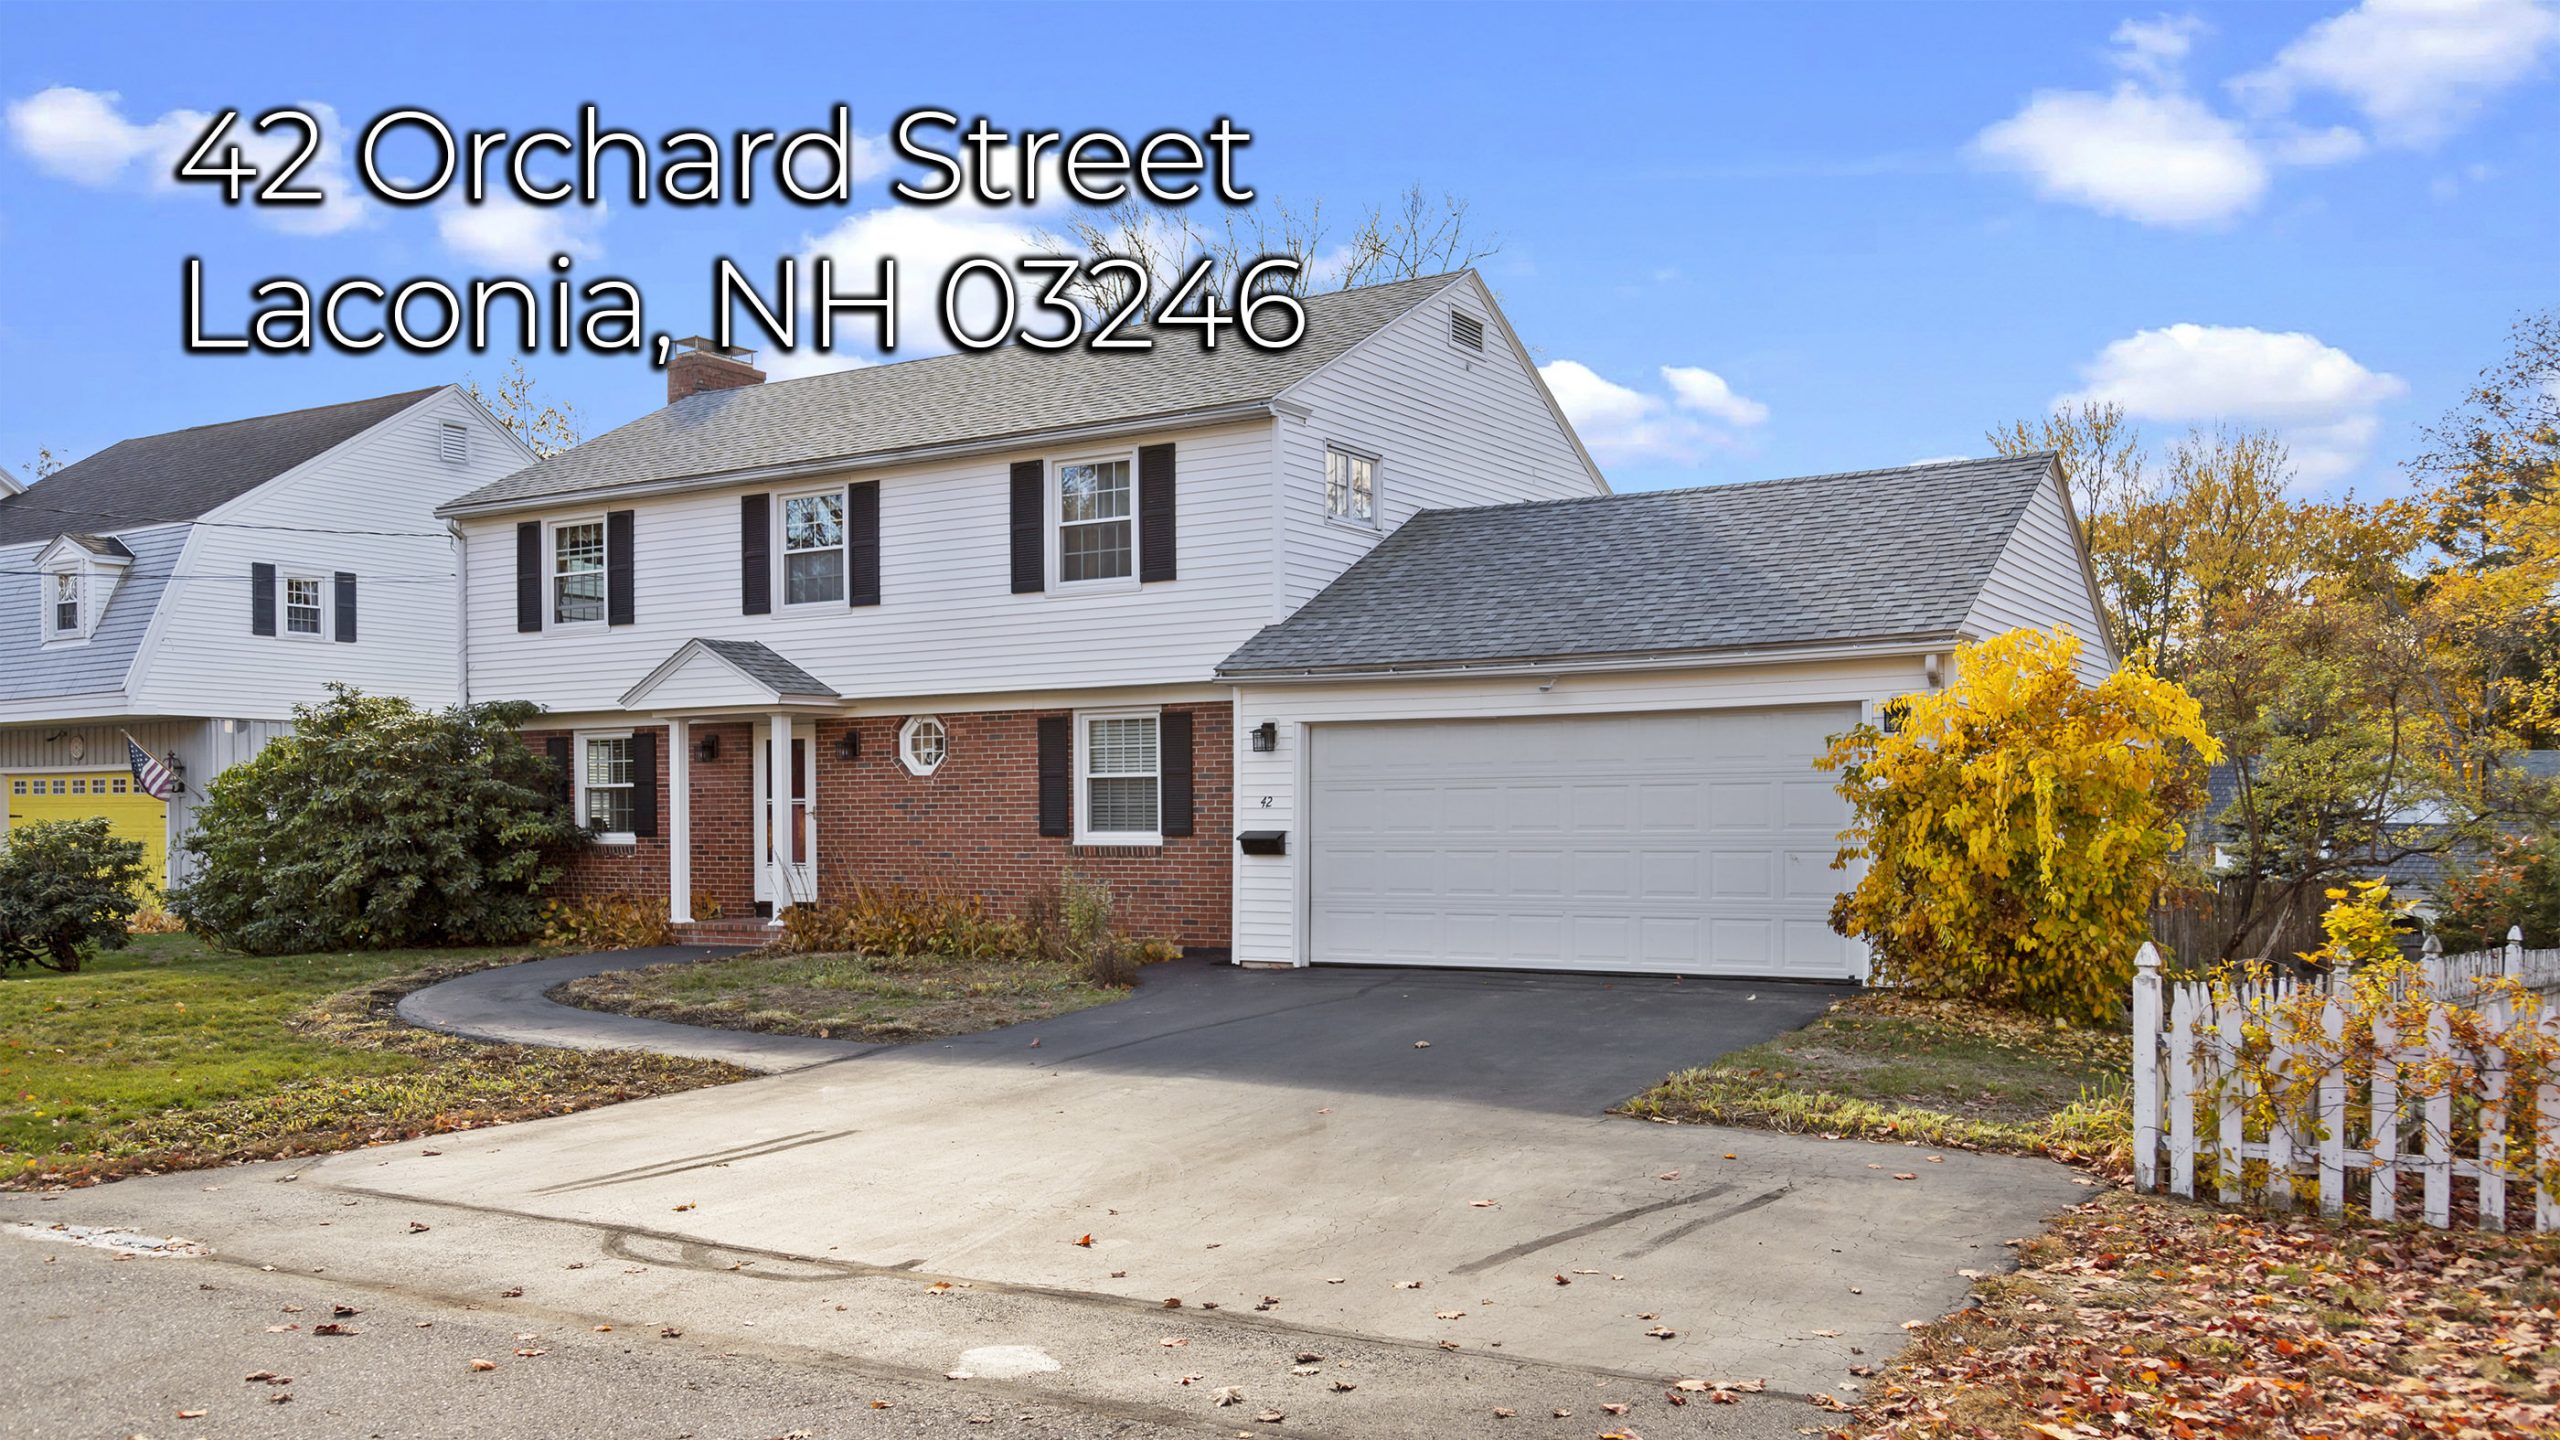 42 Orchard St Laconia NH 03246